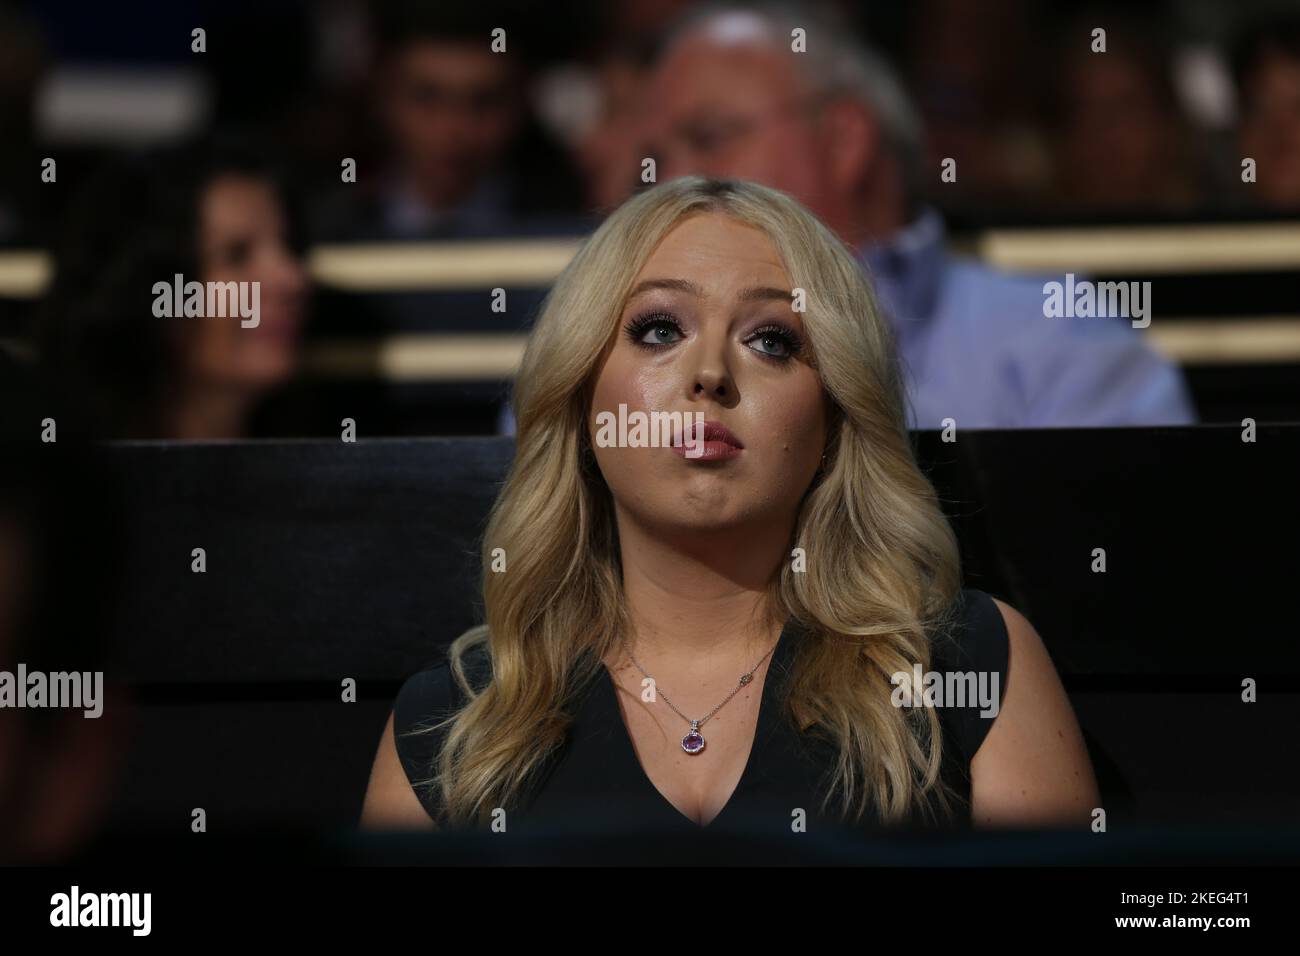 **FILE PHOTO** Tiffany Trump Through the years ahead of her Wedding on Saturday November 12, 2022. Cleveland, Ohio, USA, 18th July, 2016 Tiffany Trump younger daughter of Donald Trump sits in the family box at the Republican National Convention Credit: Mark Reinstein/MediaPunch Stock Photo